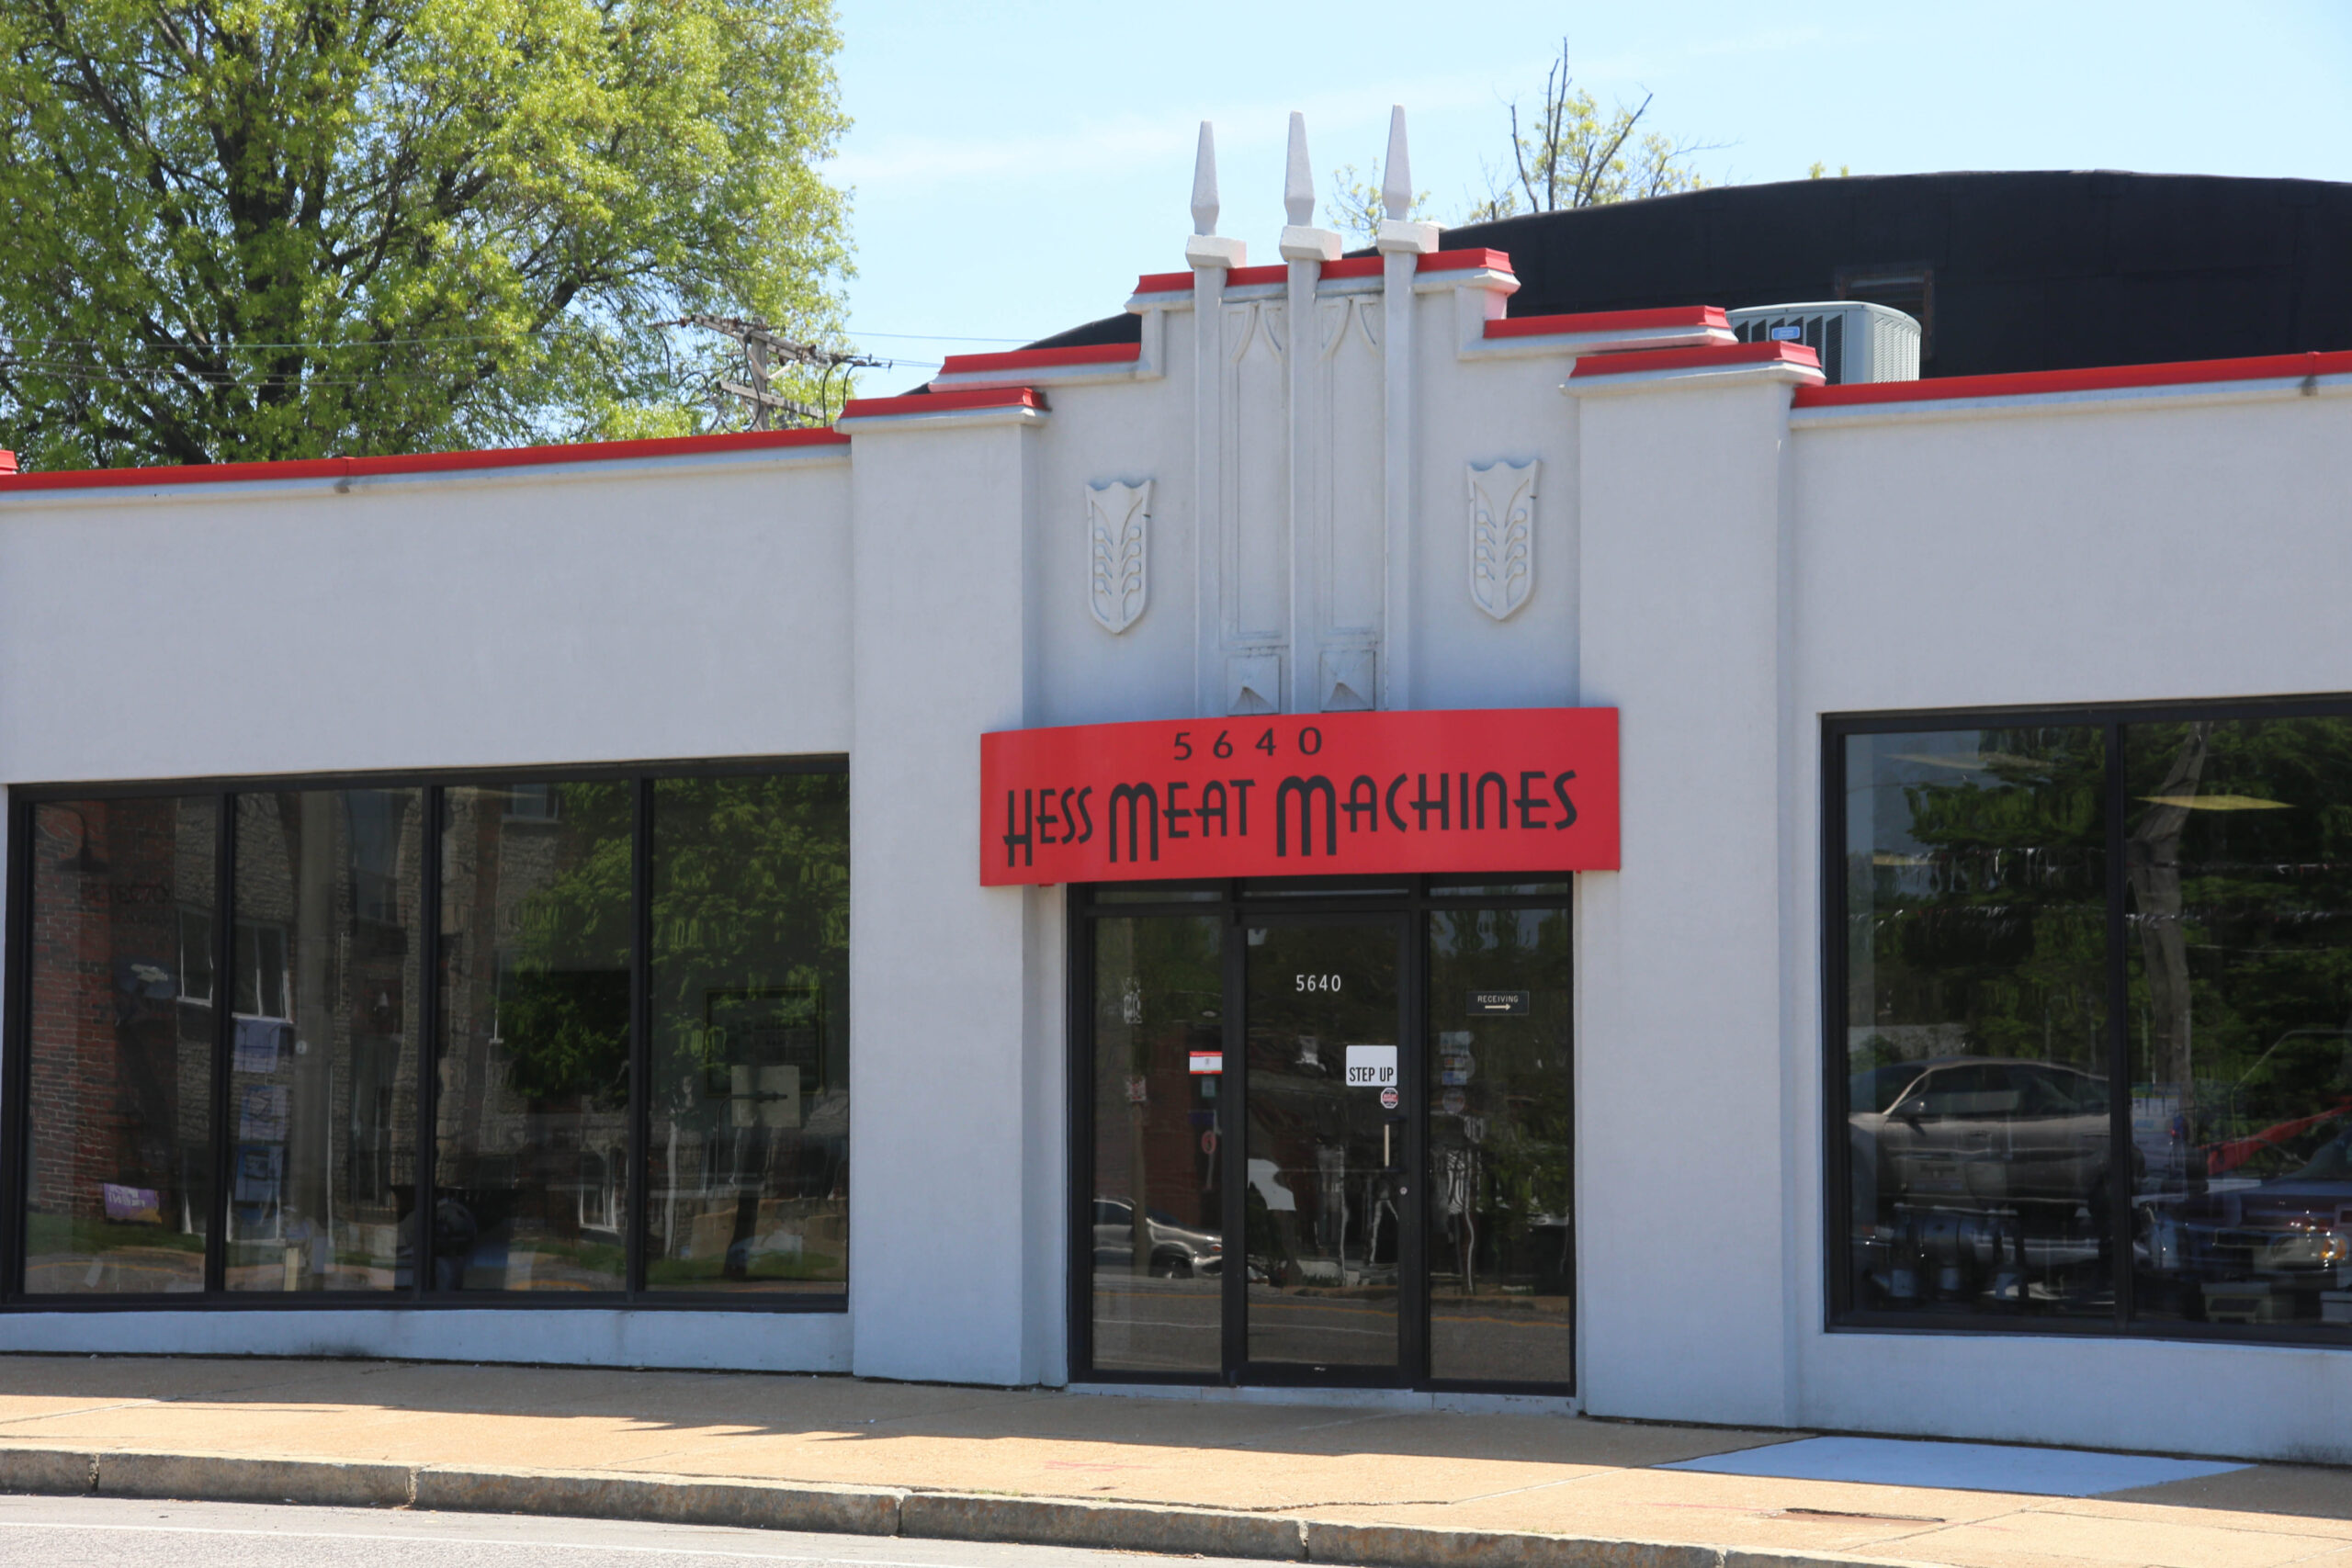 Exterior of Hess Meat Machines Building